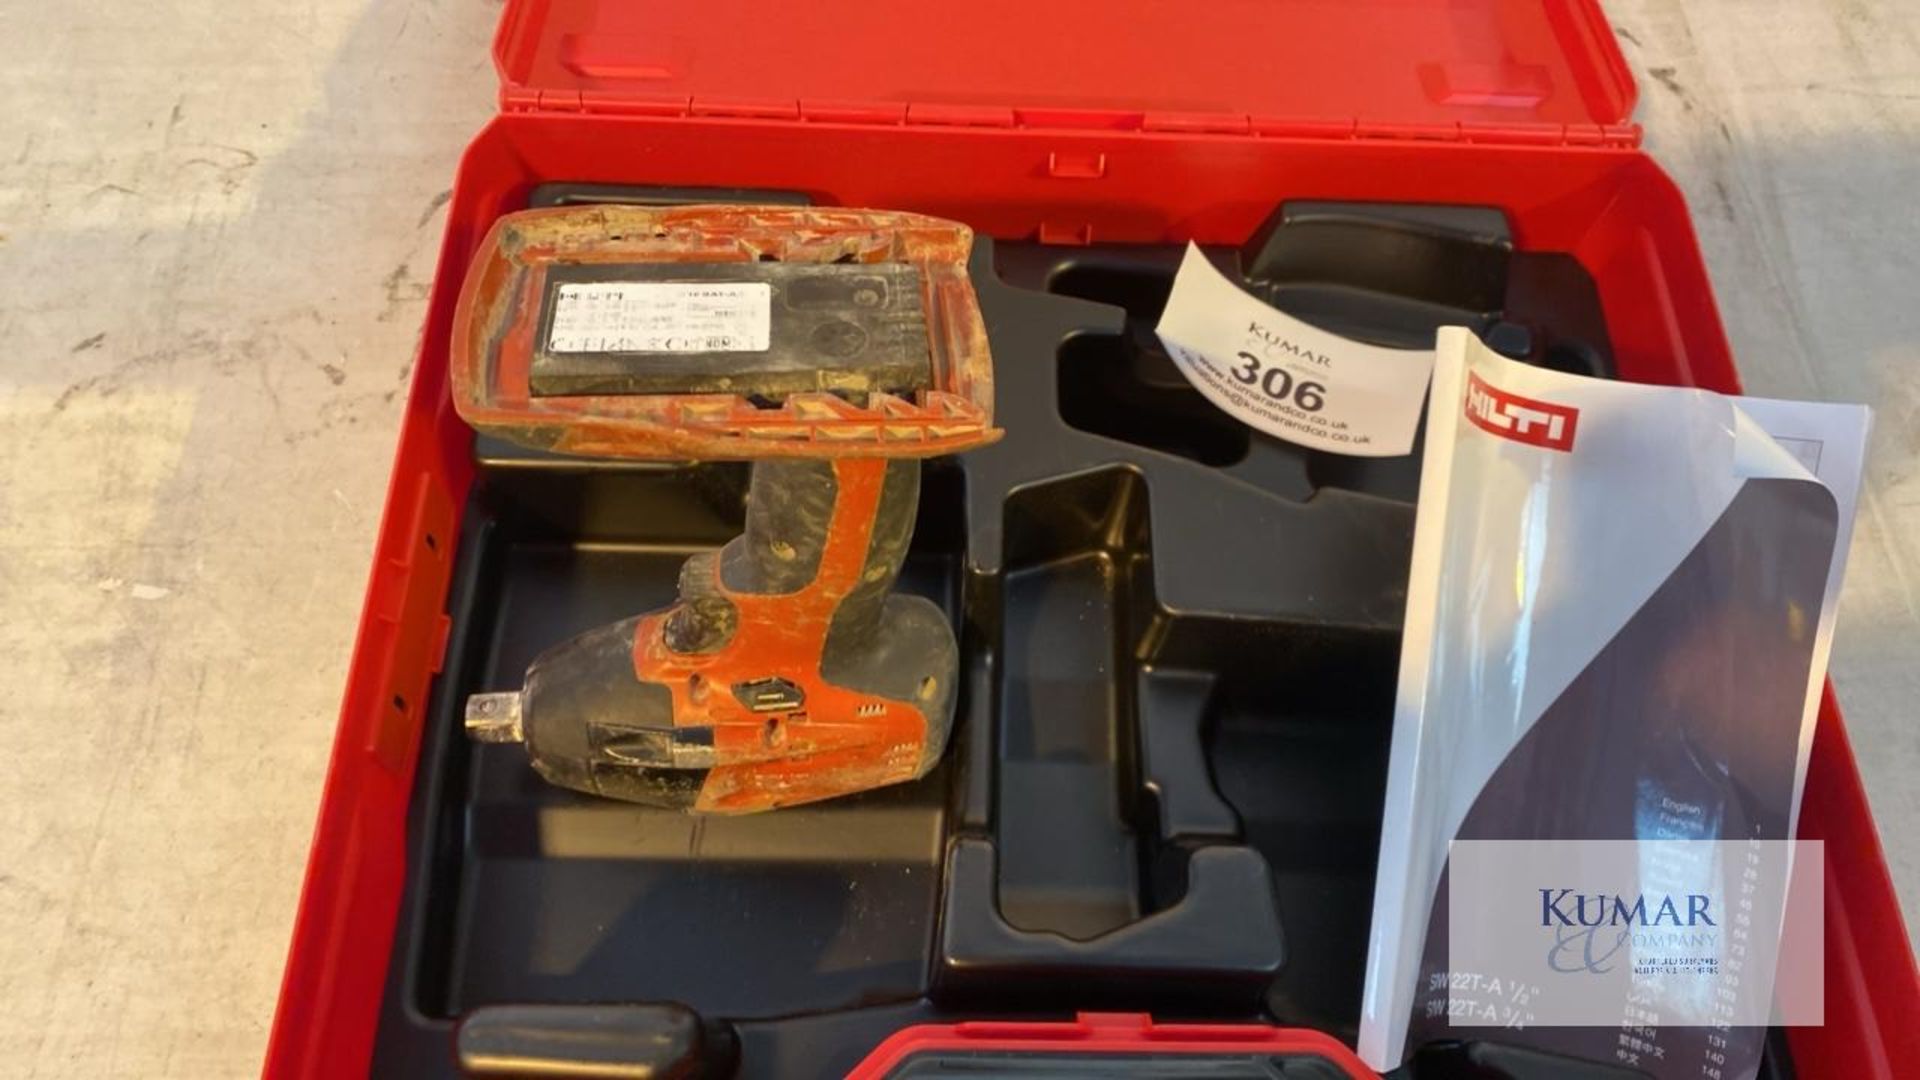 Hilti 1/2" Impact Gun (no battery) in Carry Case - Image 5 of 5